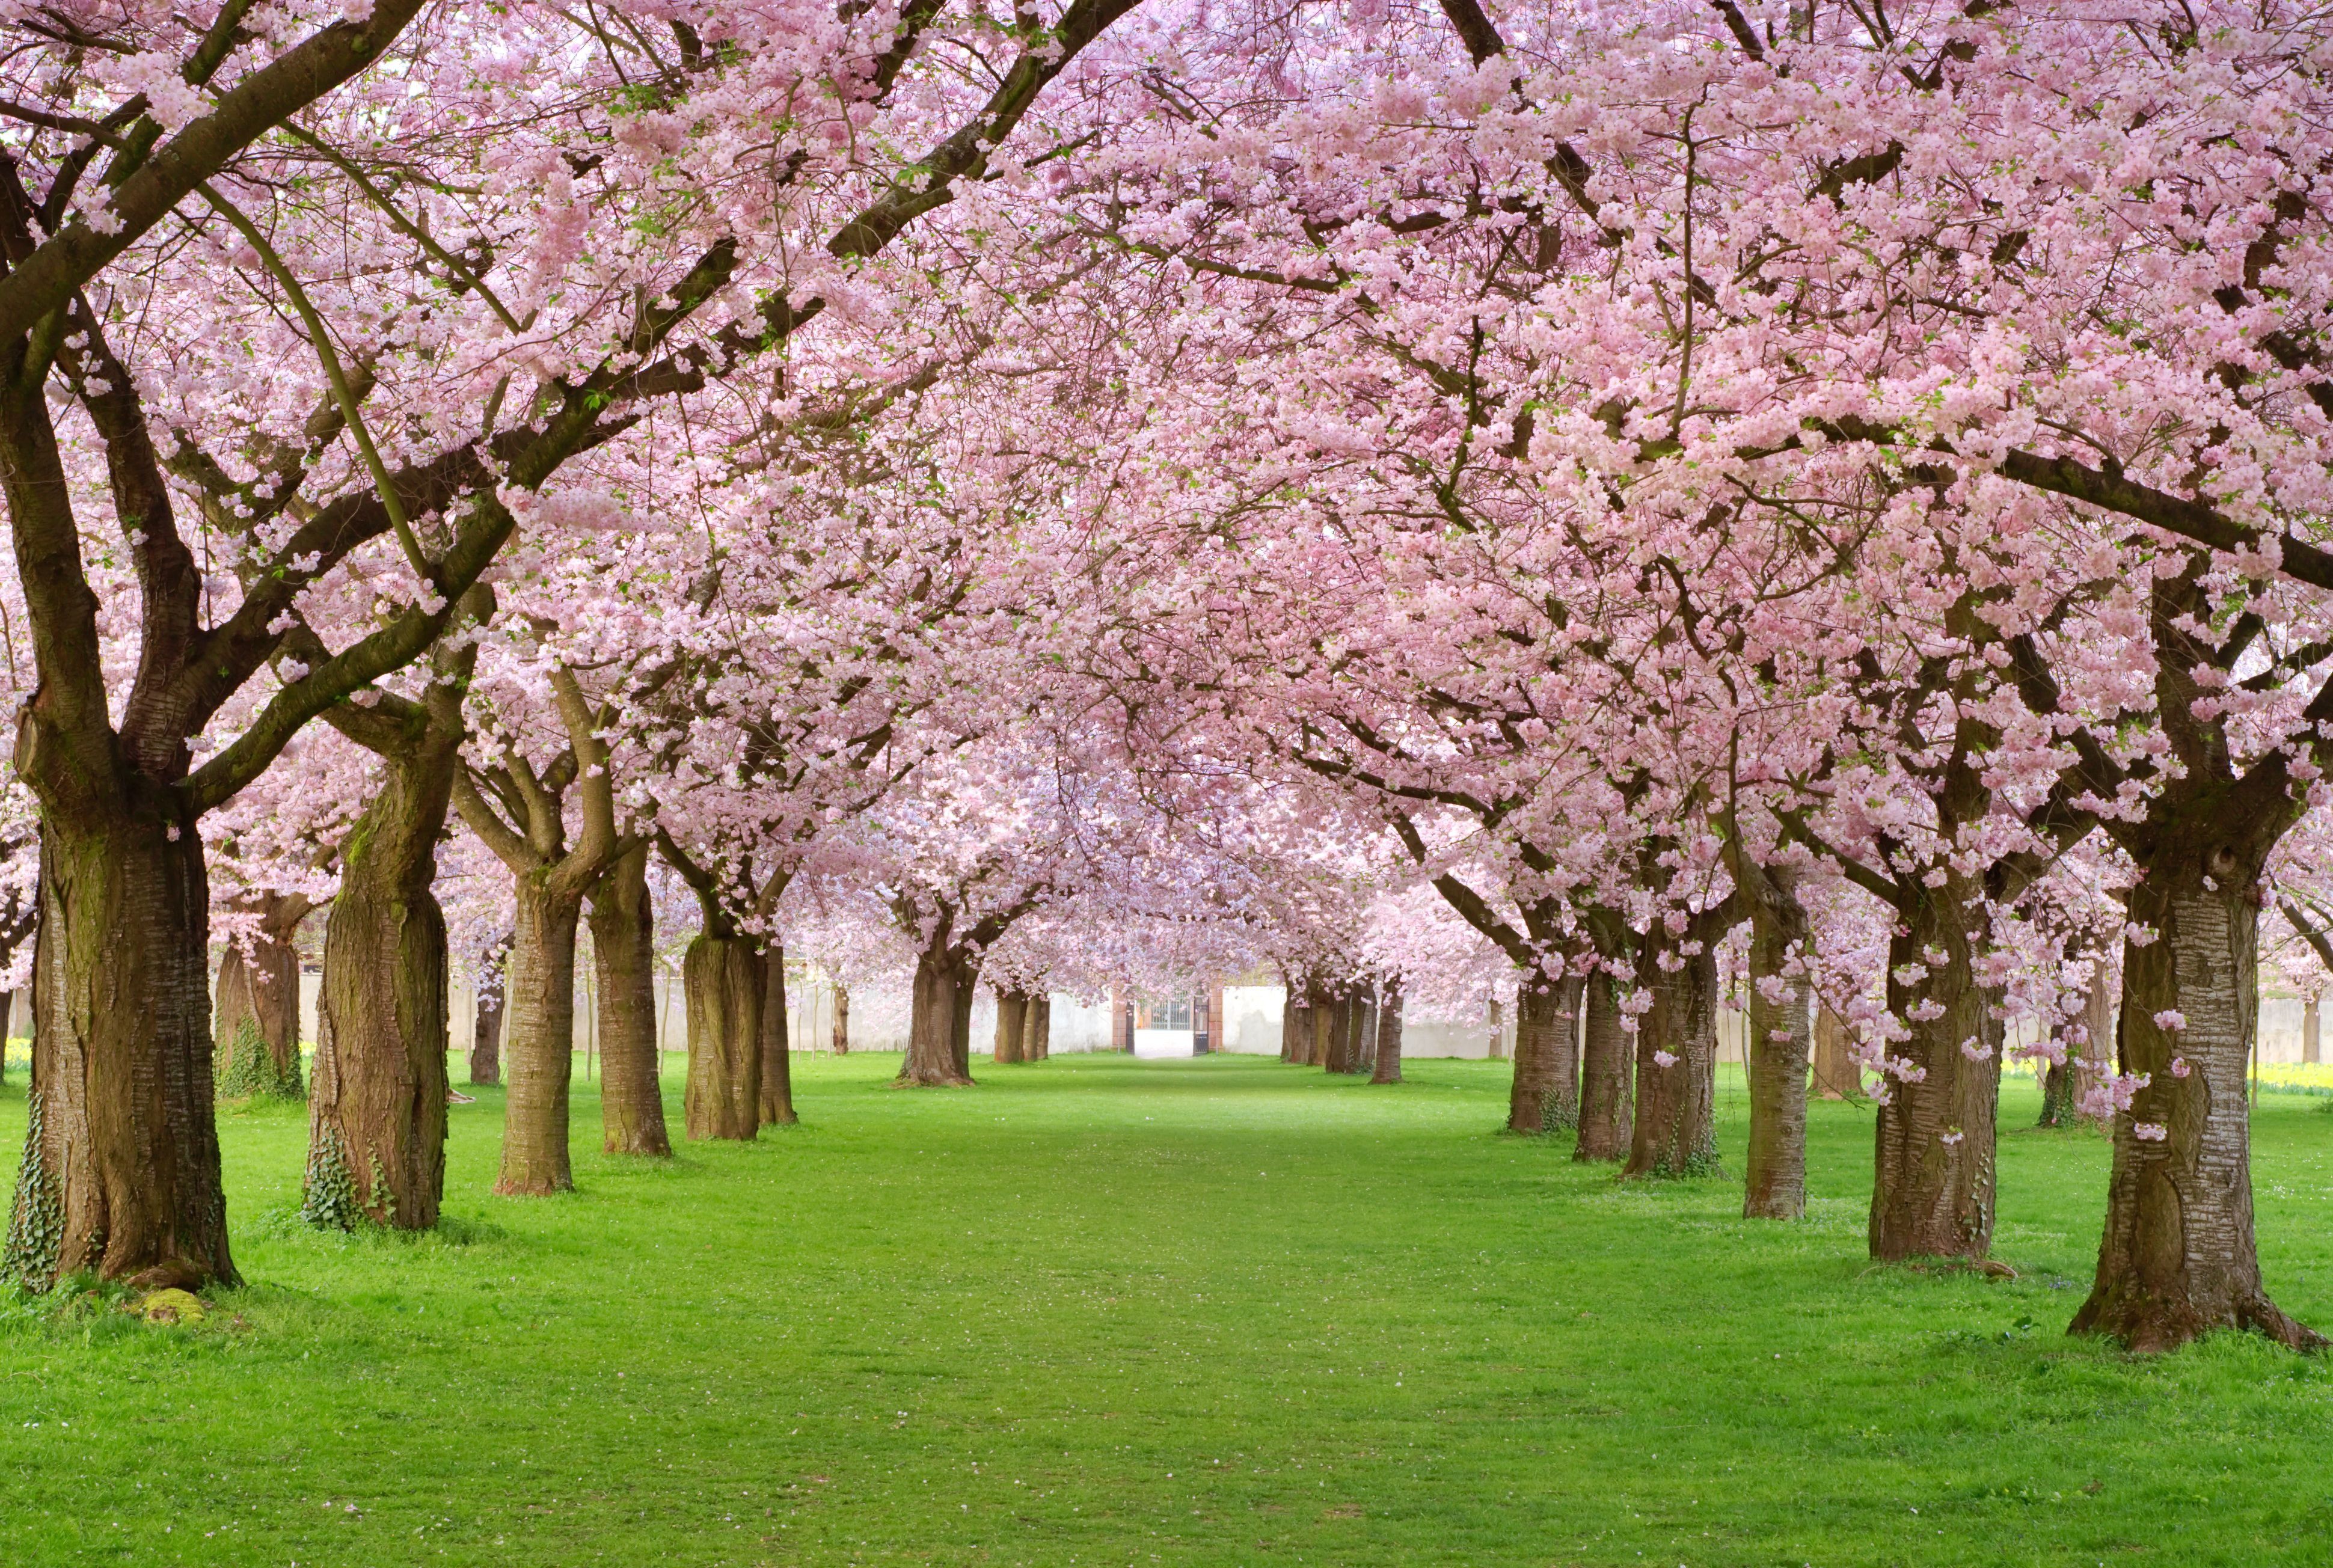 Spring blossom, spring, trees wallpaper | nature and landscape ...